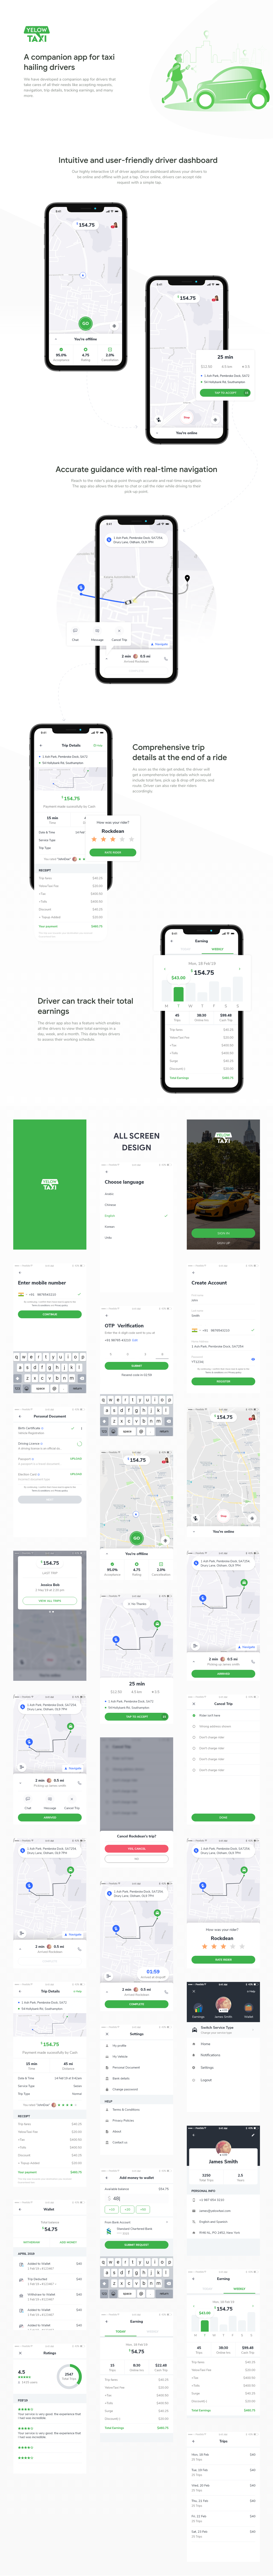 taxi ride hailing Driver app Taxi Hailing uber like Ride Hailing software realtime Navigation Taxi Booking Management Adobe XD taxi dispatch system